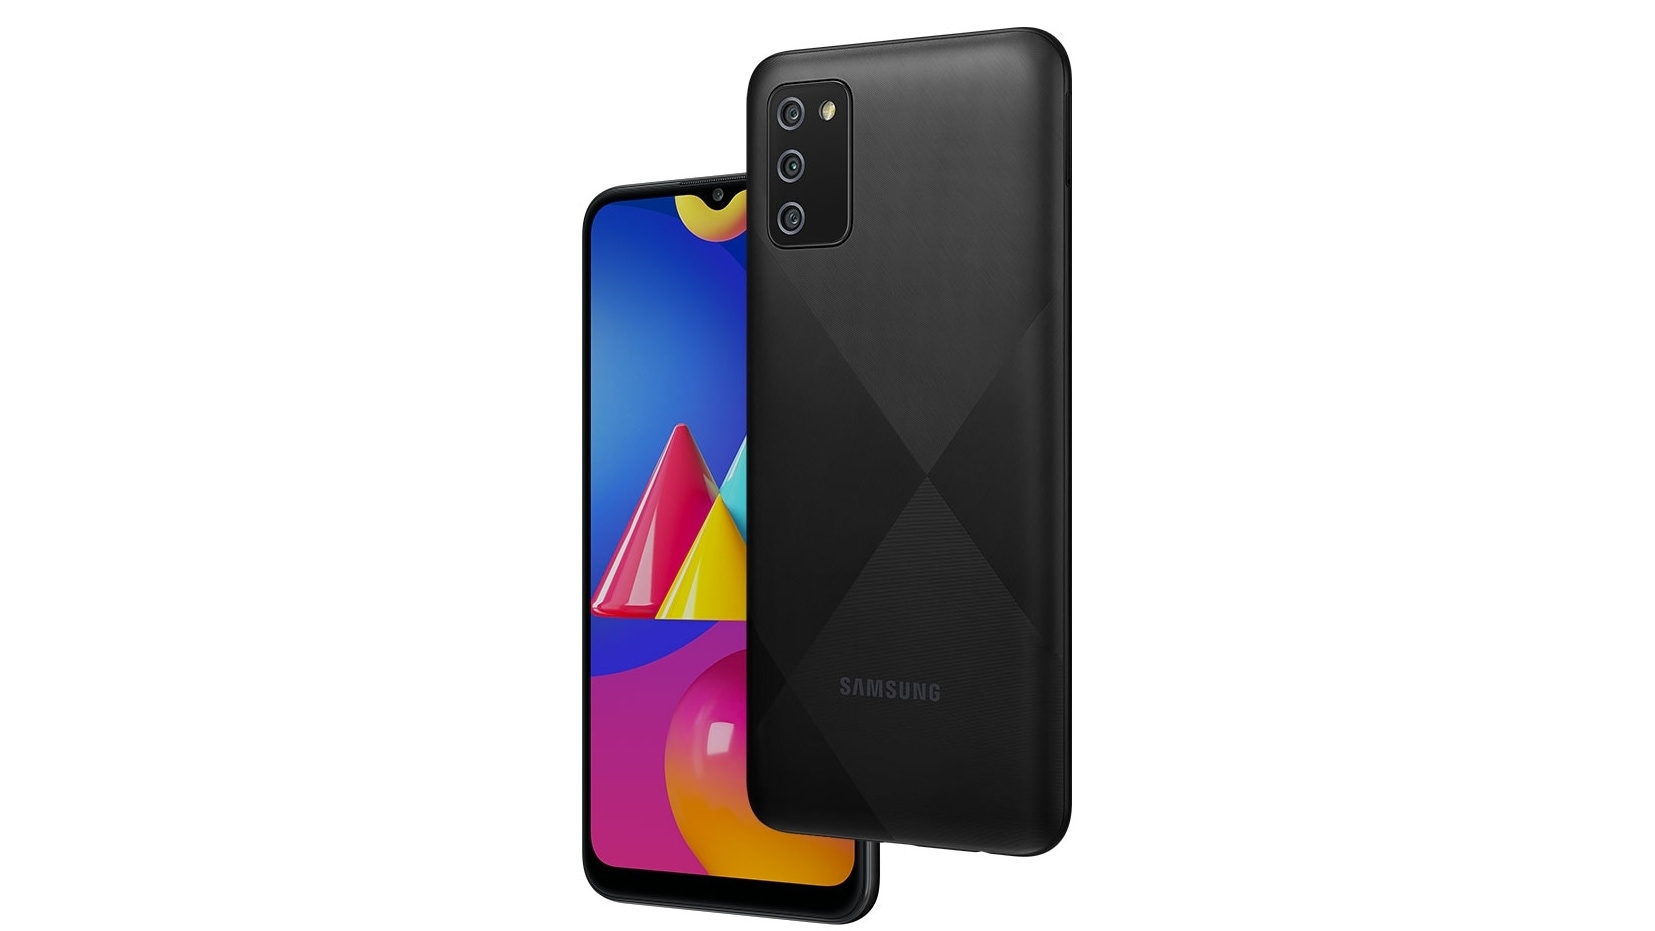 The Samsung Galaxy M02s runs Android 10 with Samsung’s OneUI on top. Image: Samsung